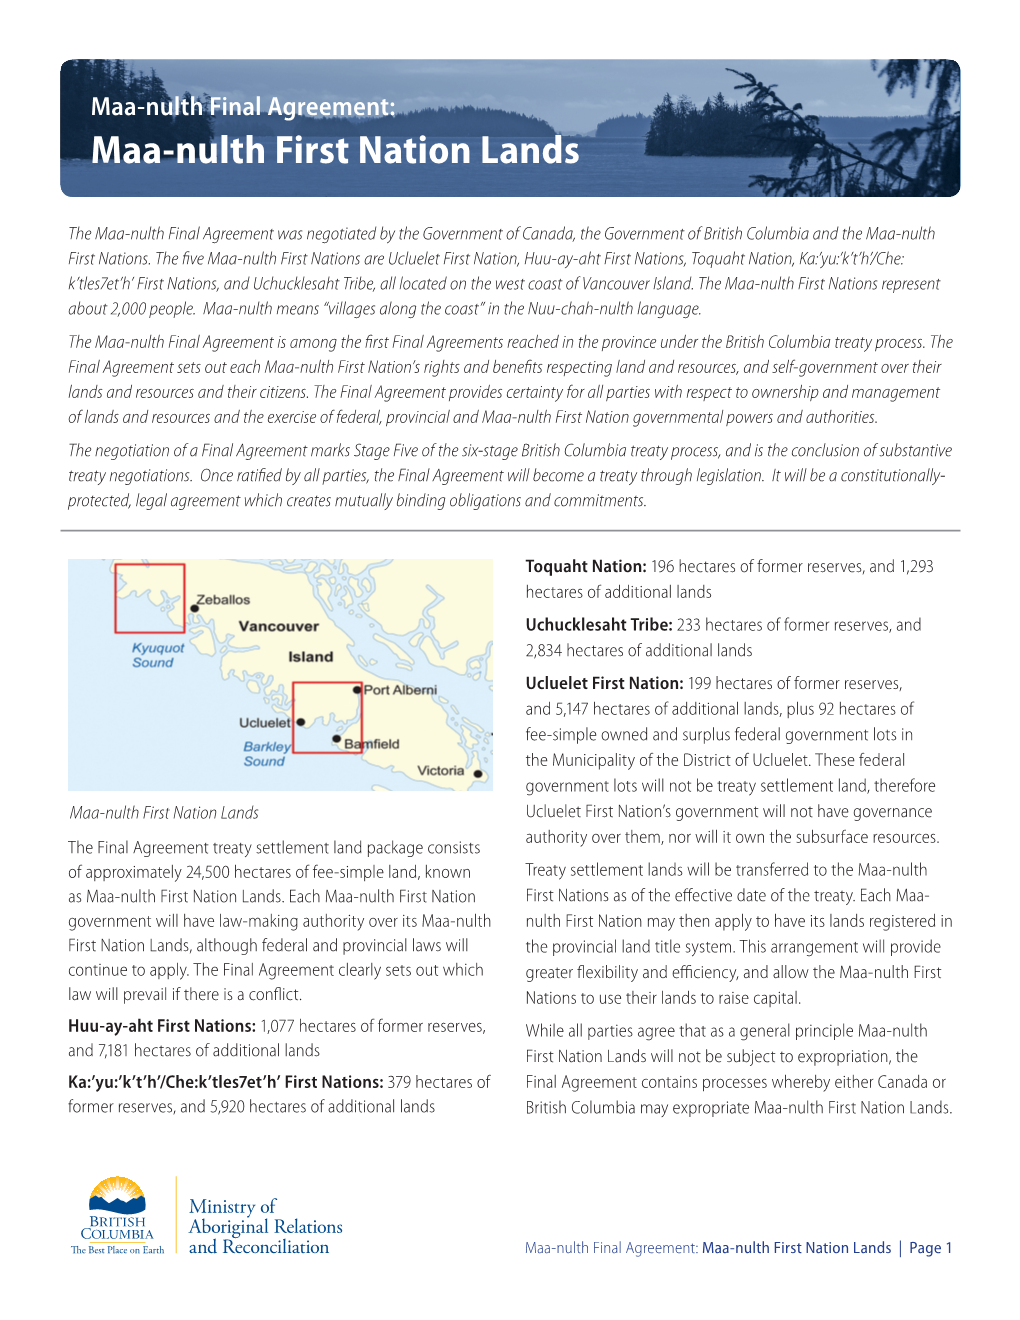 Maa-Nulth First Nation Lands